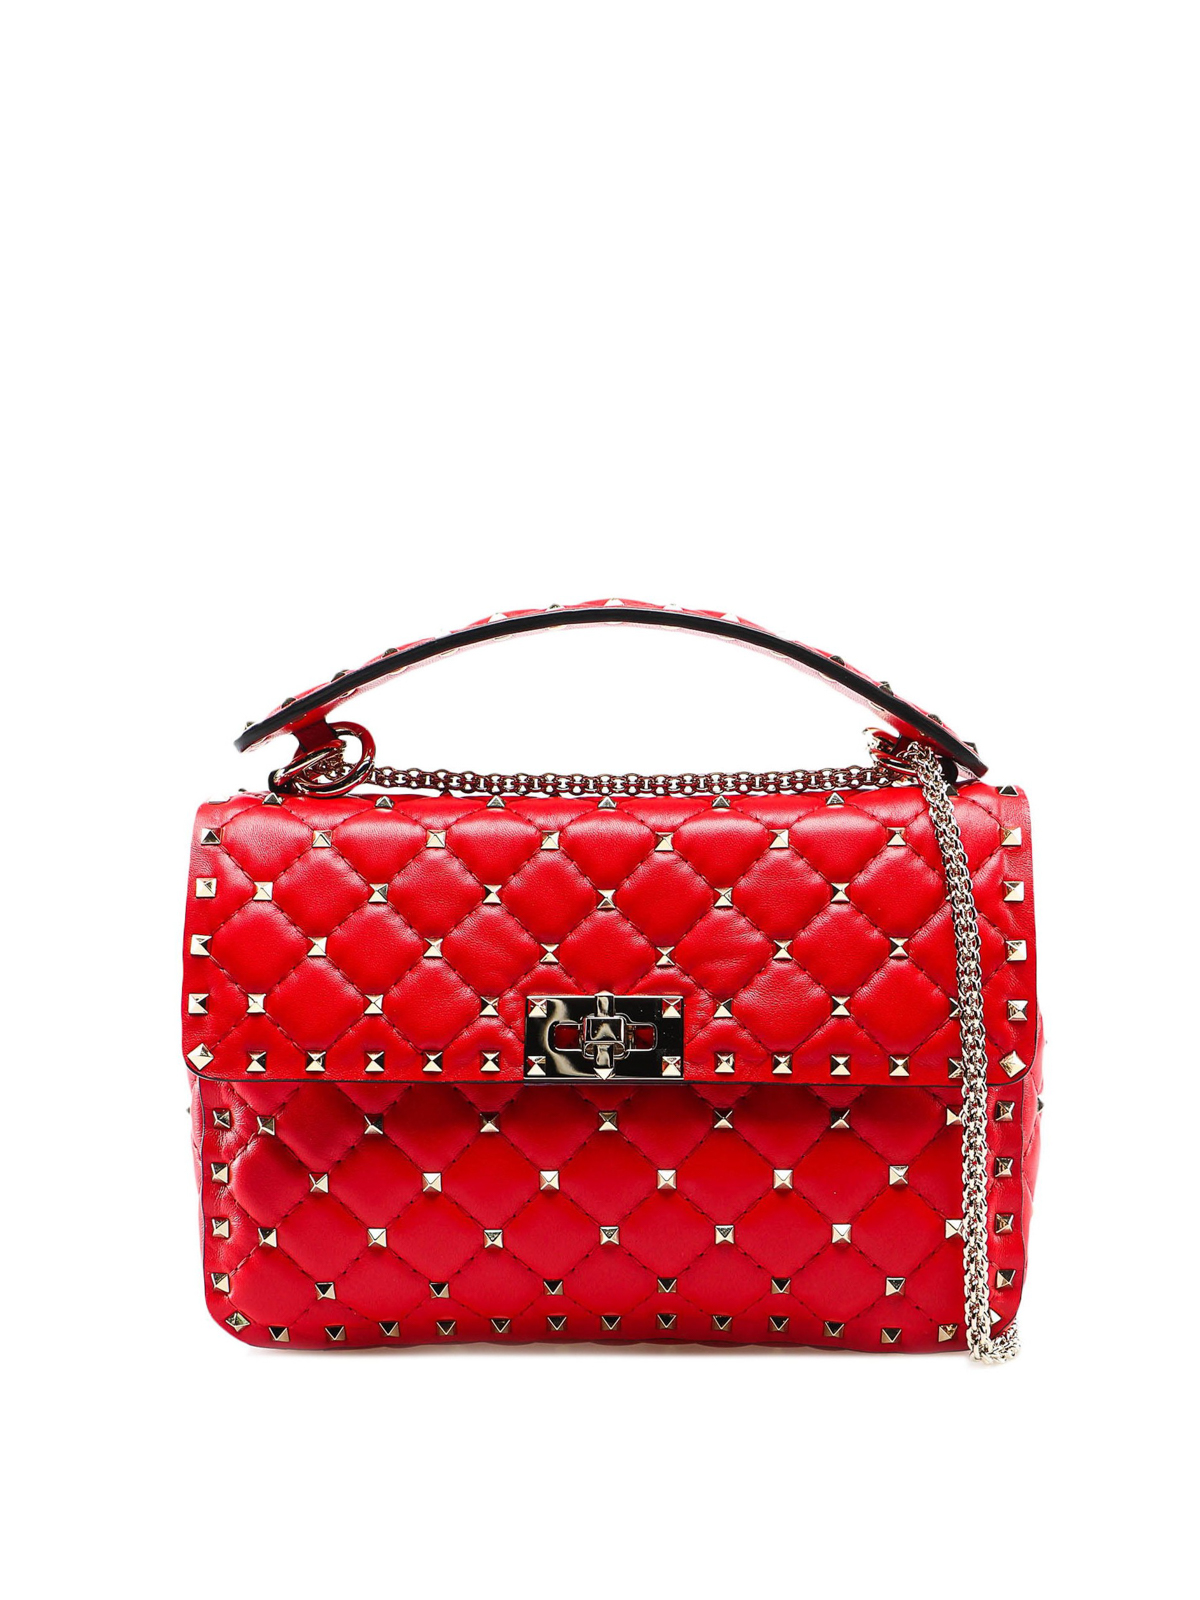 Valentino Small Patent Rockstud Spike Bag- Red